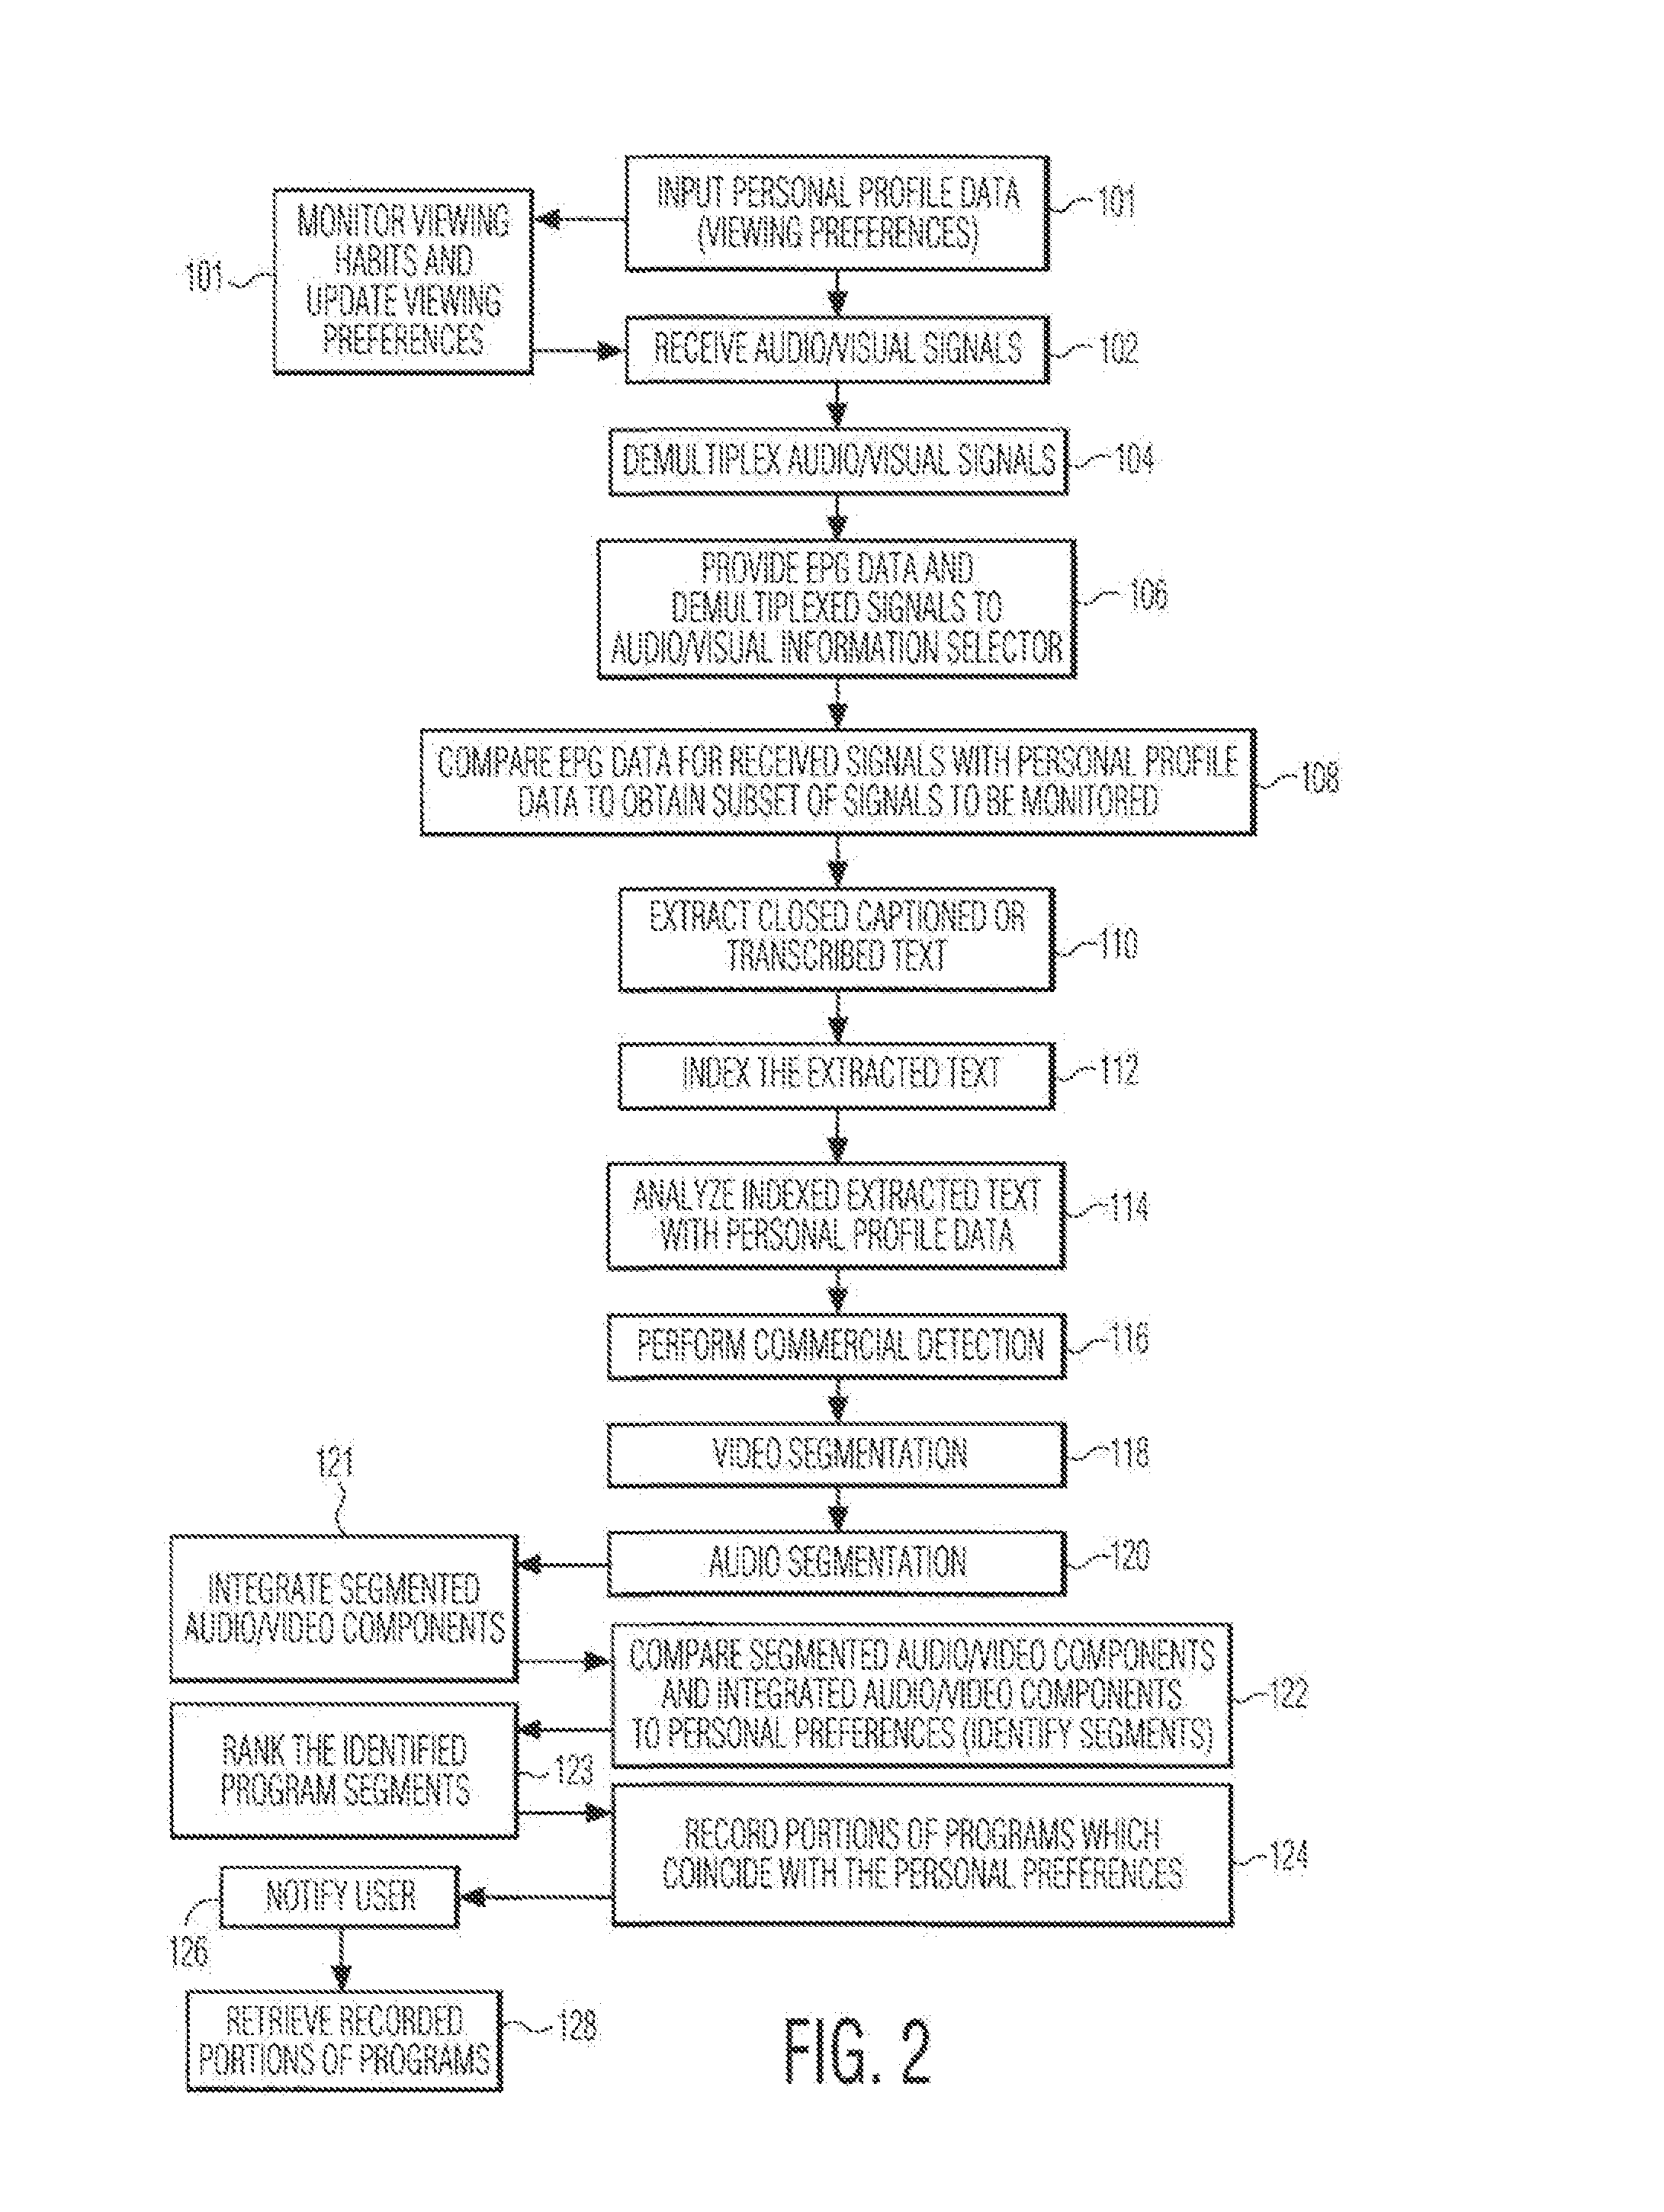 Method and apparatus for audio/data/visual information